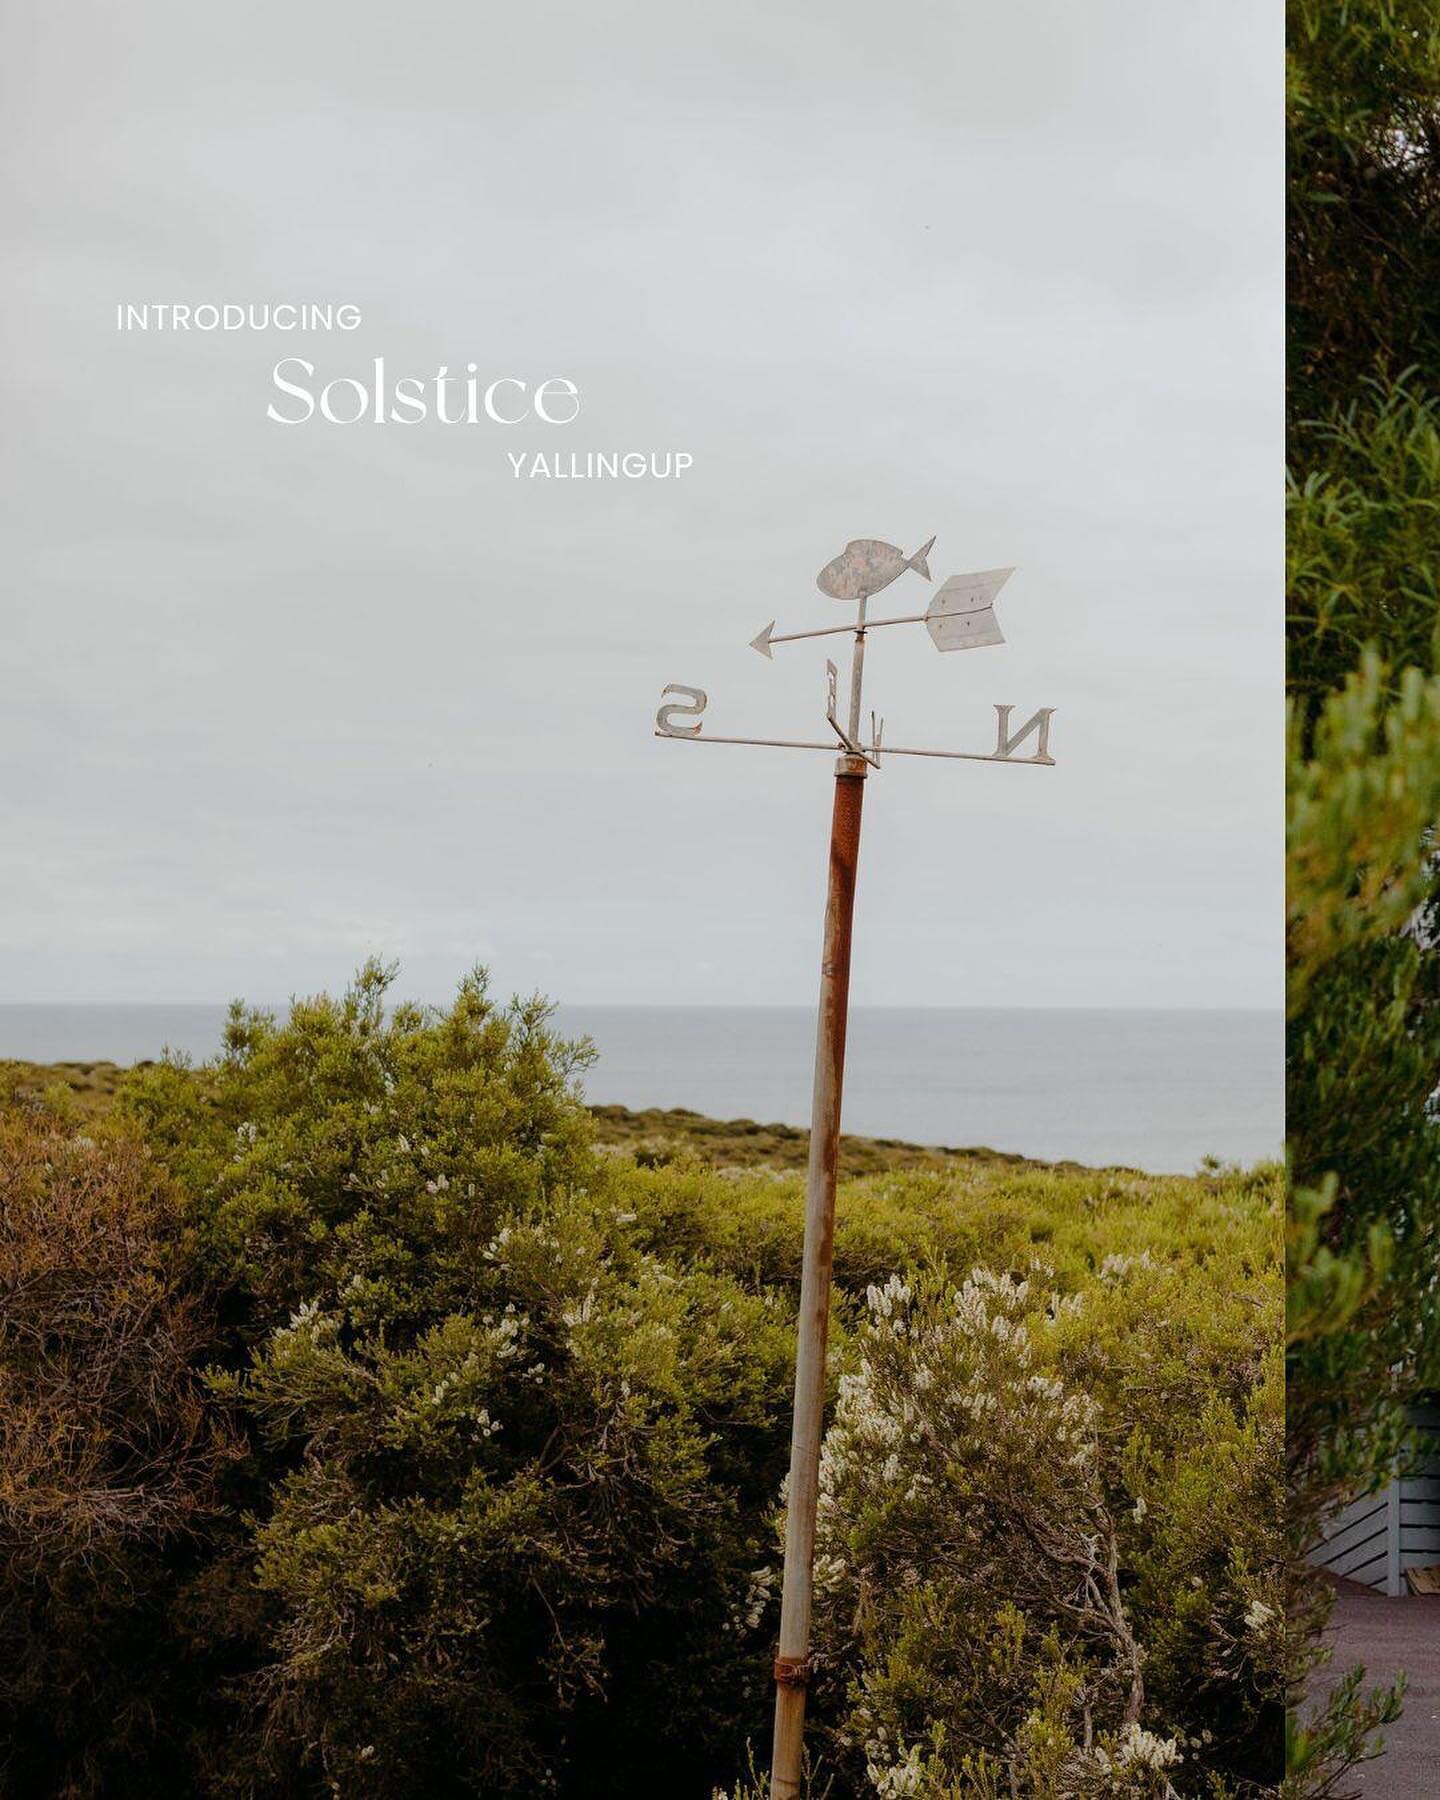 Introducing S O L S T I C E&hellip;

The very newest home to the My Vacay Stay family. 

This stunning Yallingup residence is truly spectacular inside and out. Solstice sleeps 8, and has plenty of space to entertain or relax. 

Needing a South West g